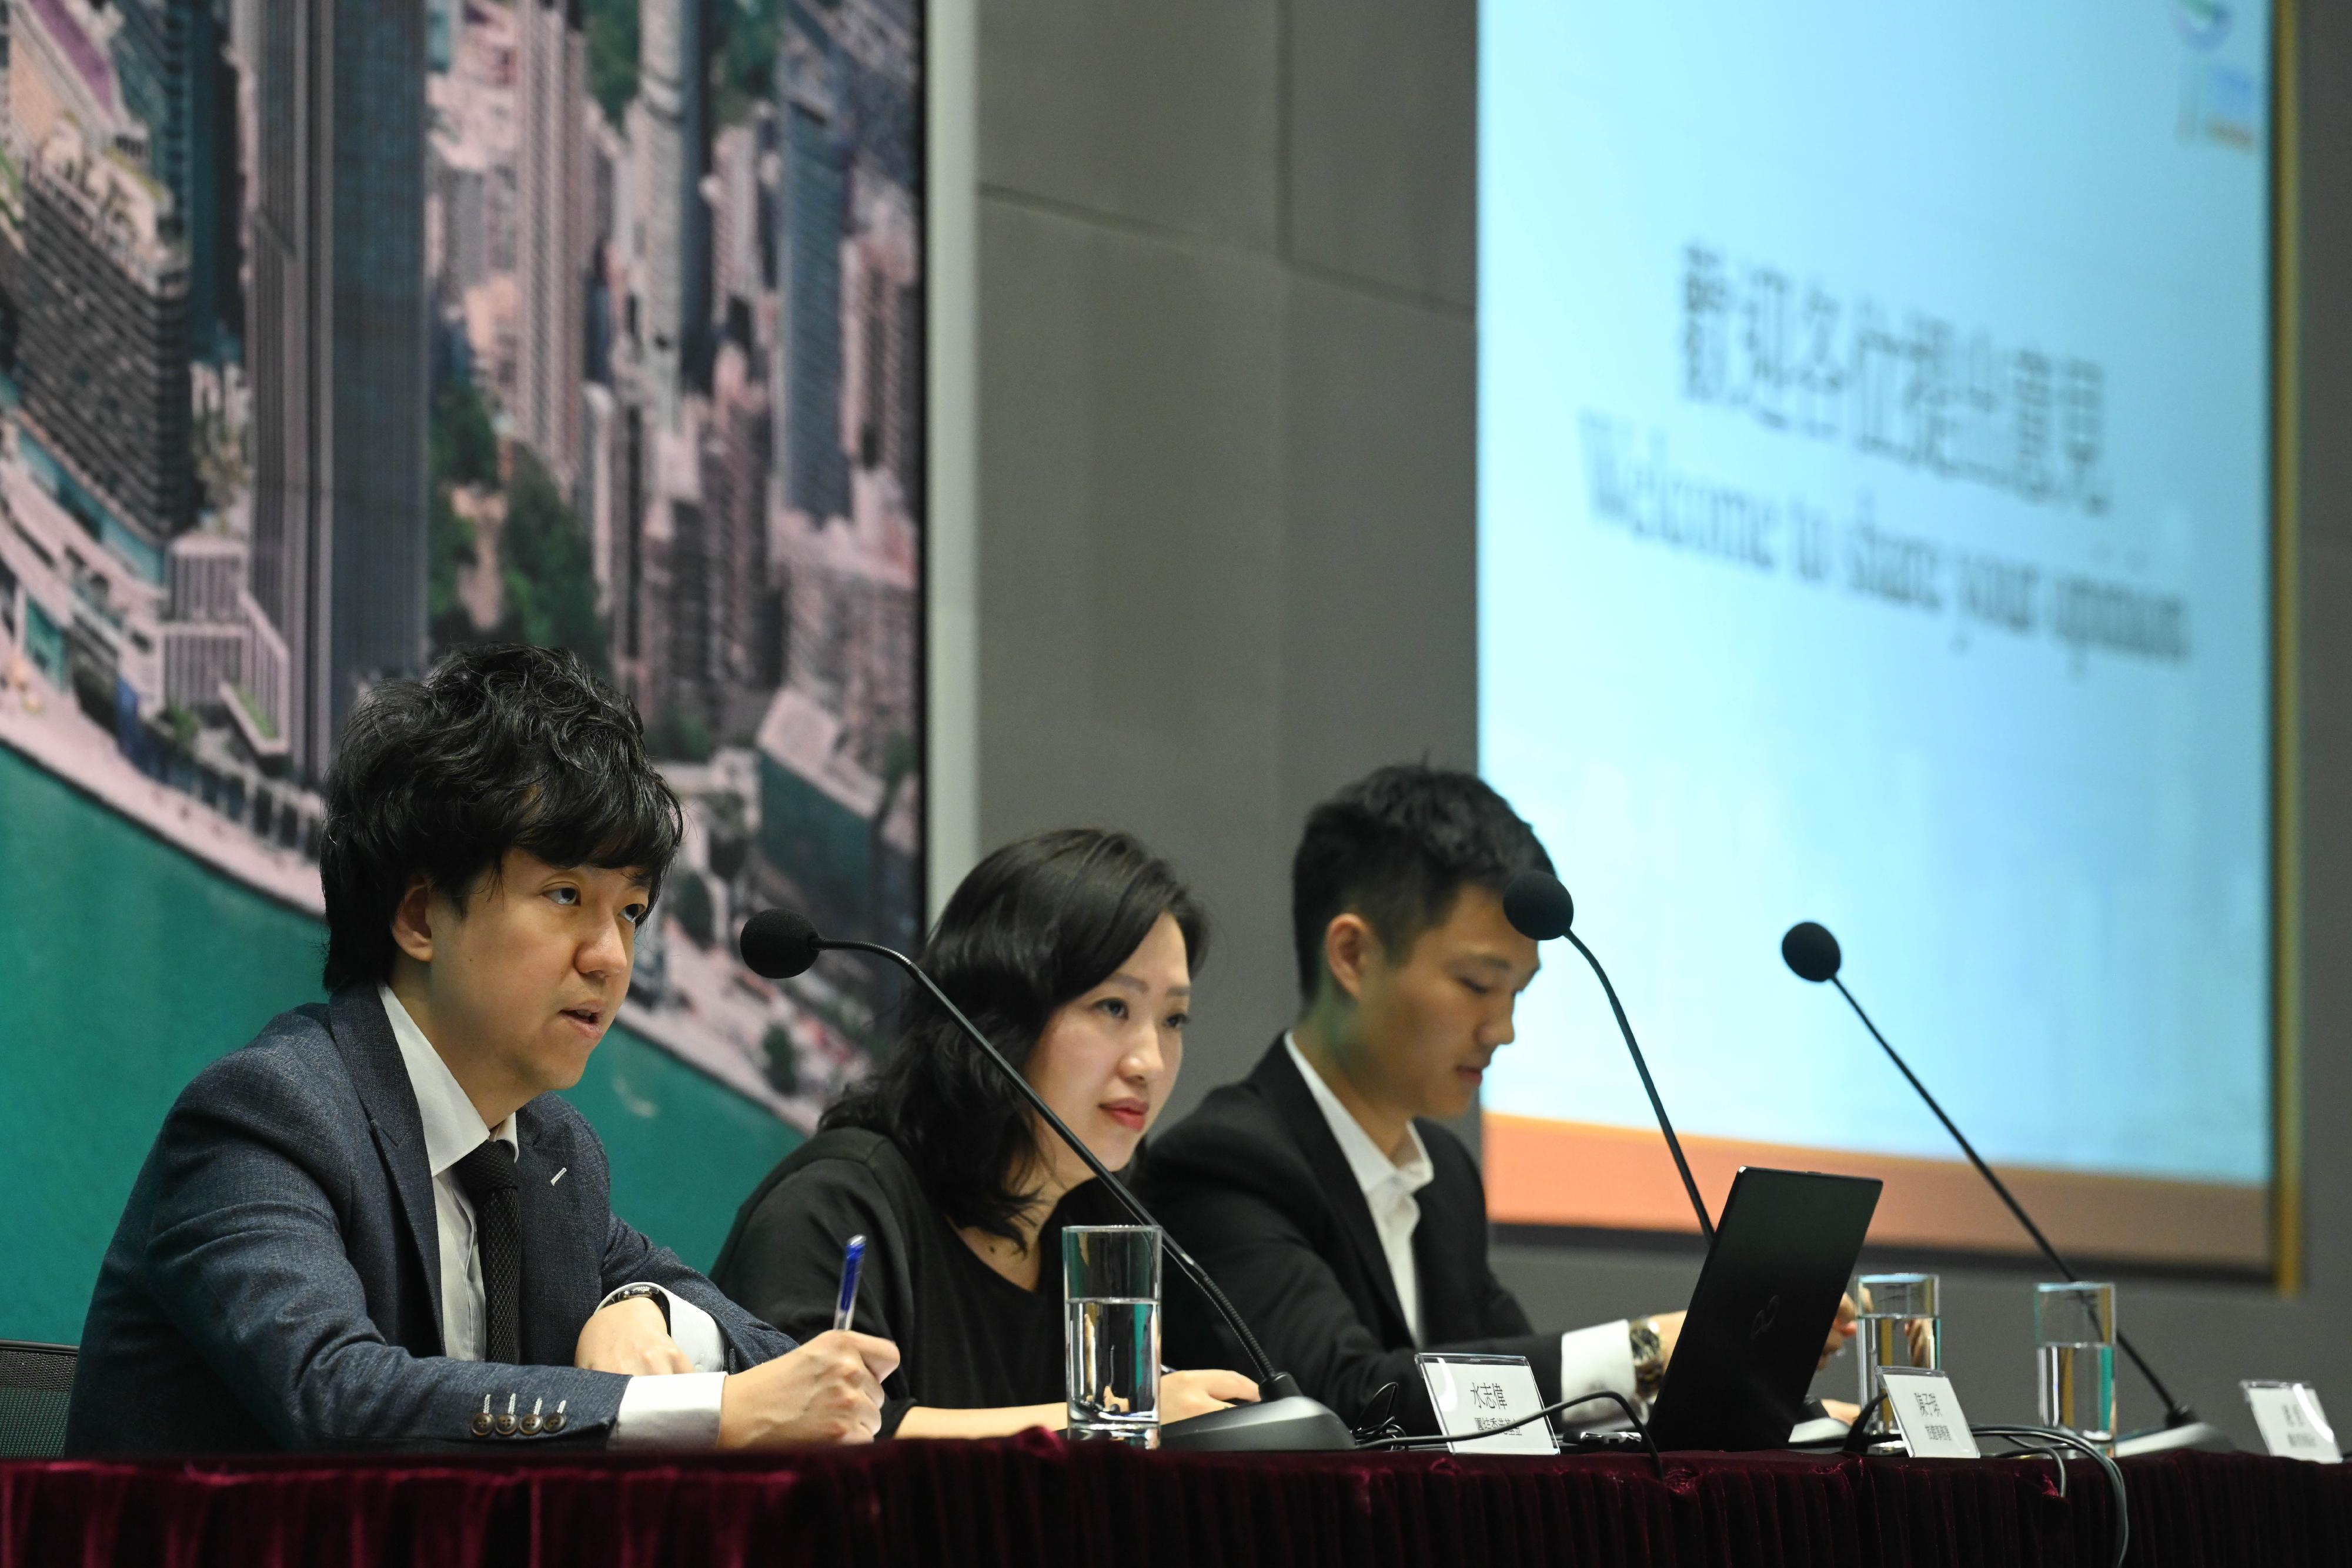 The Tourism Commission of the Culture, Sports and Tourism Bureau held a consultation session on the formulation of the Development Blueprint for Hong Kong’s Tourism Industry 2.0 in the Central Government Offices today (May 2) to exchange views with trade representatives.